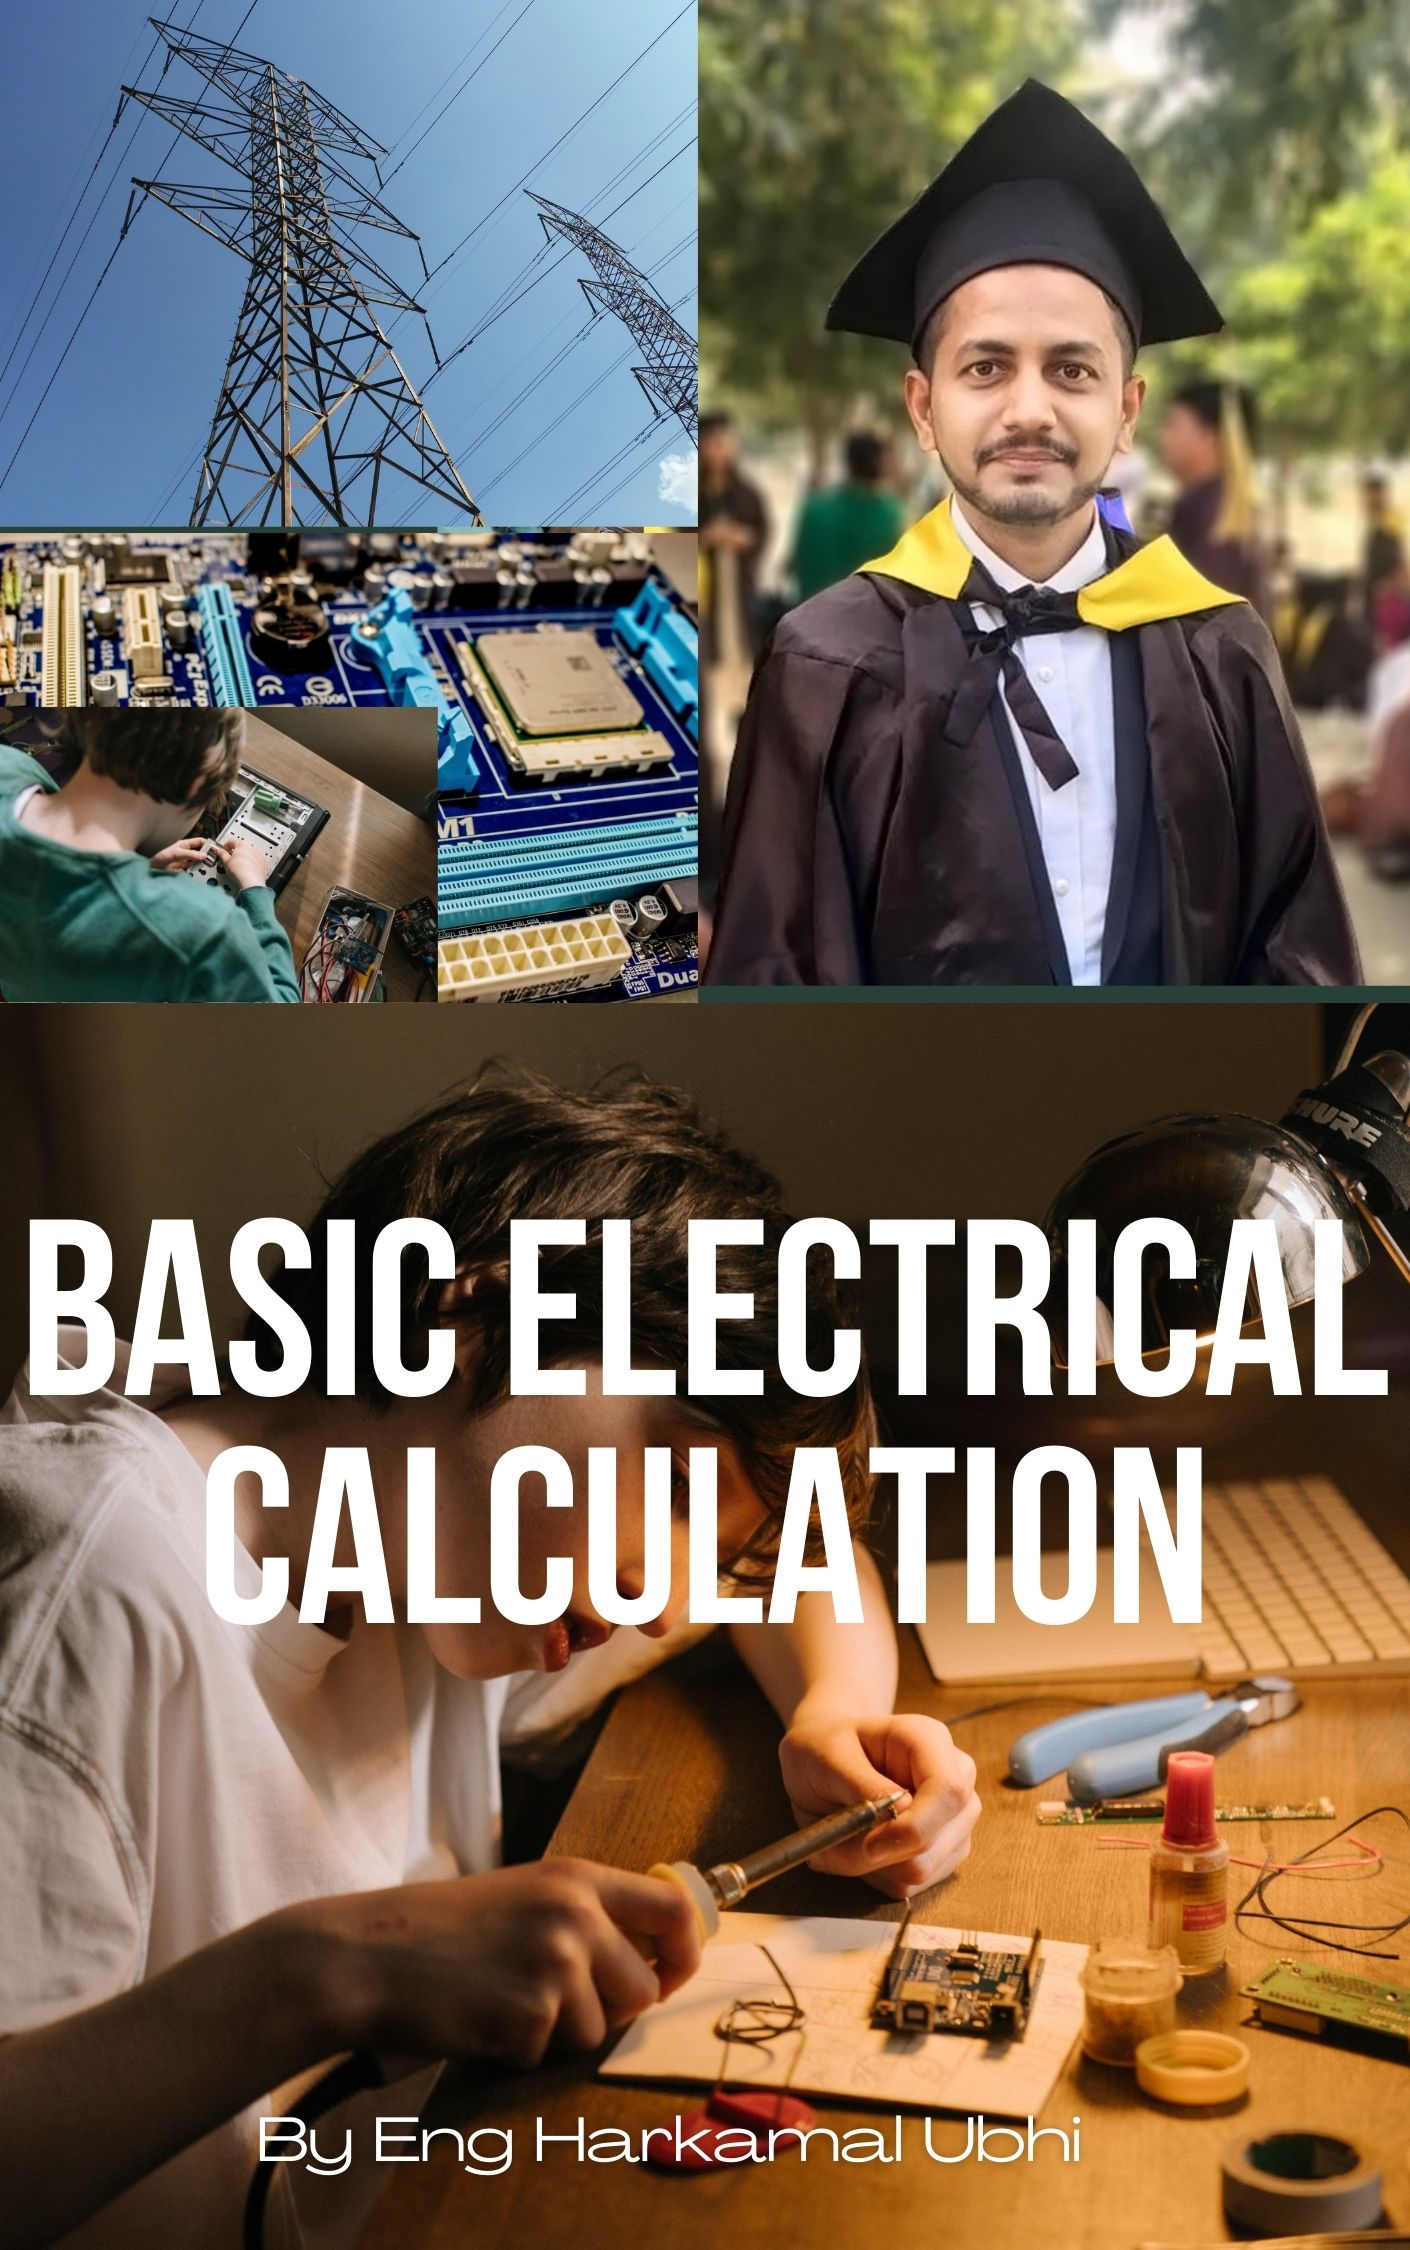 Basic Electrical Calculations